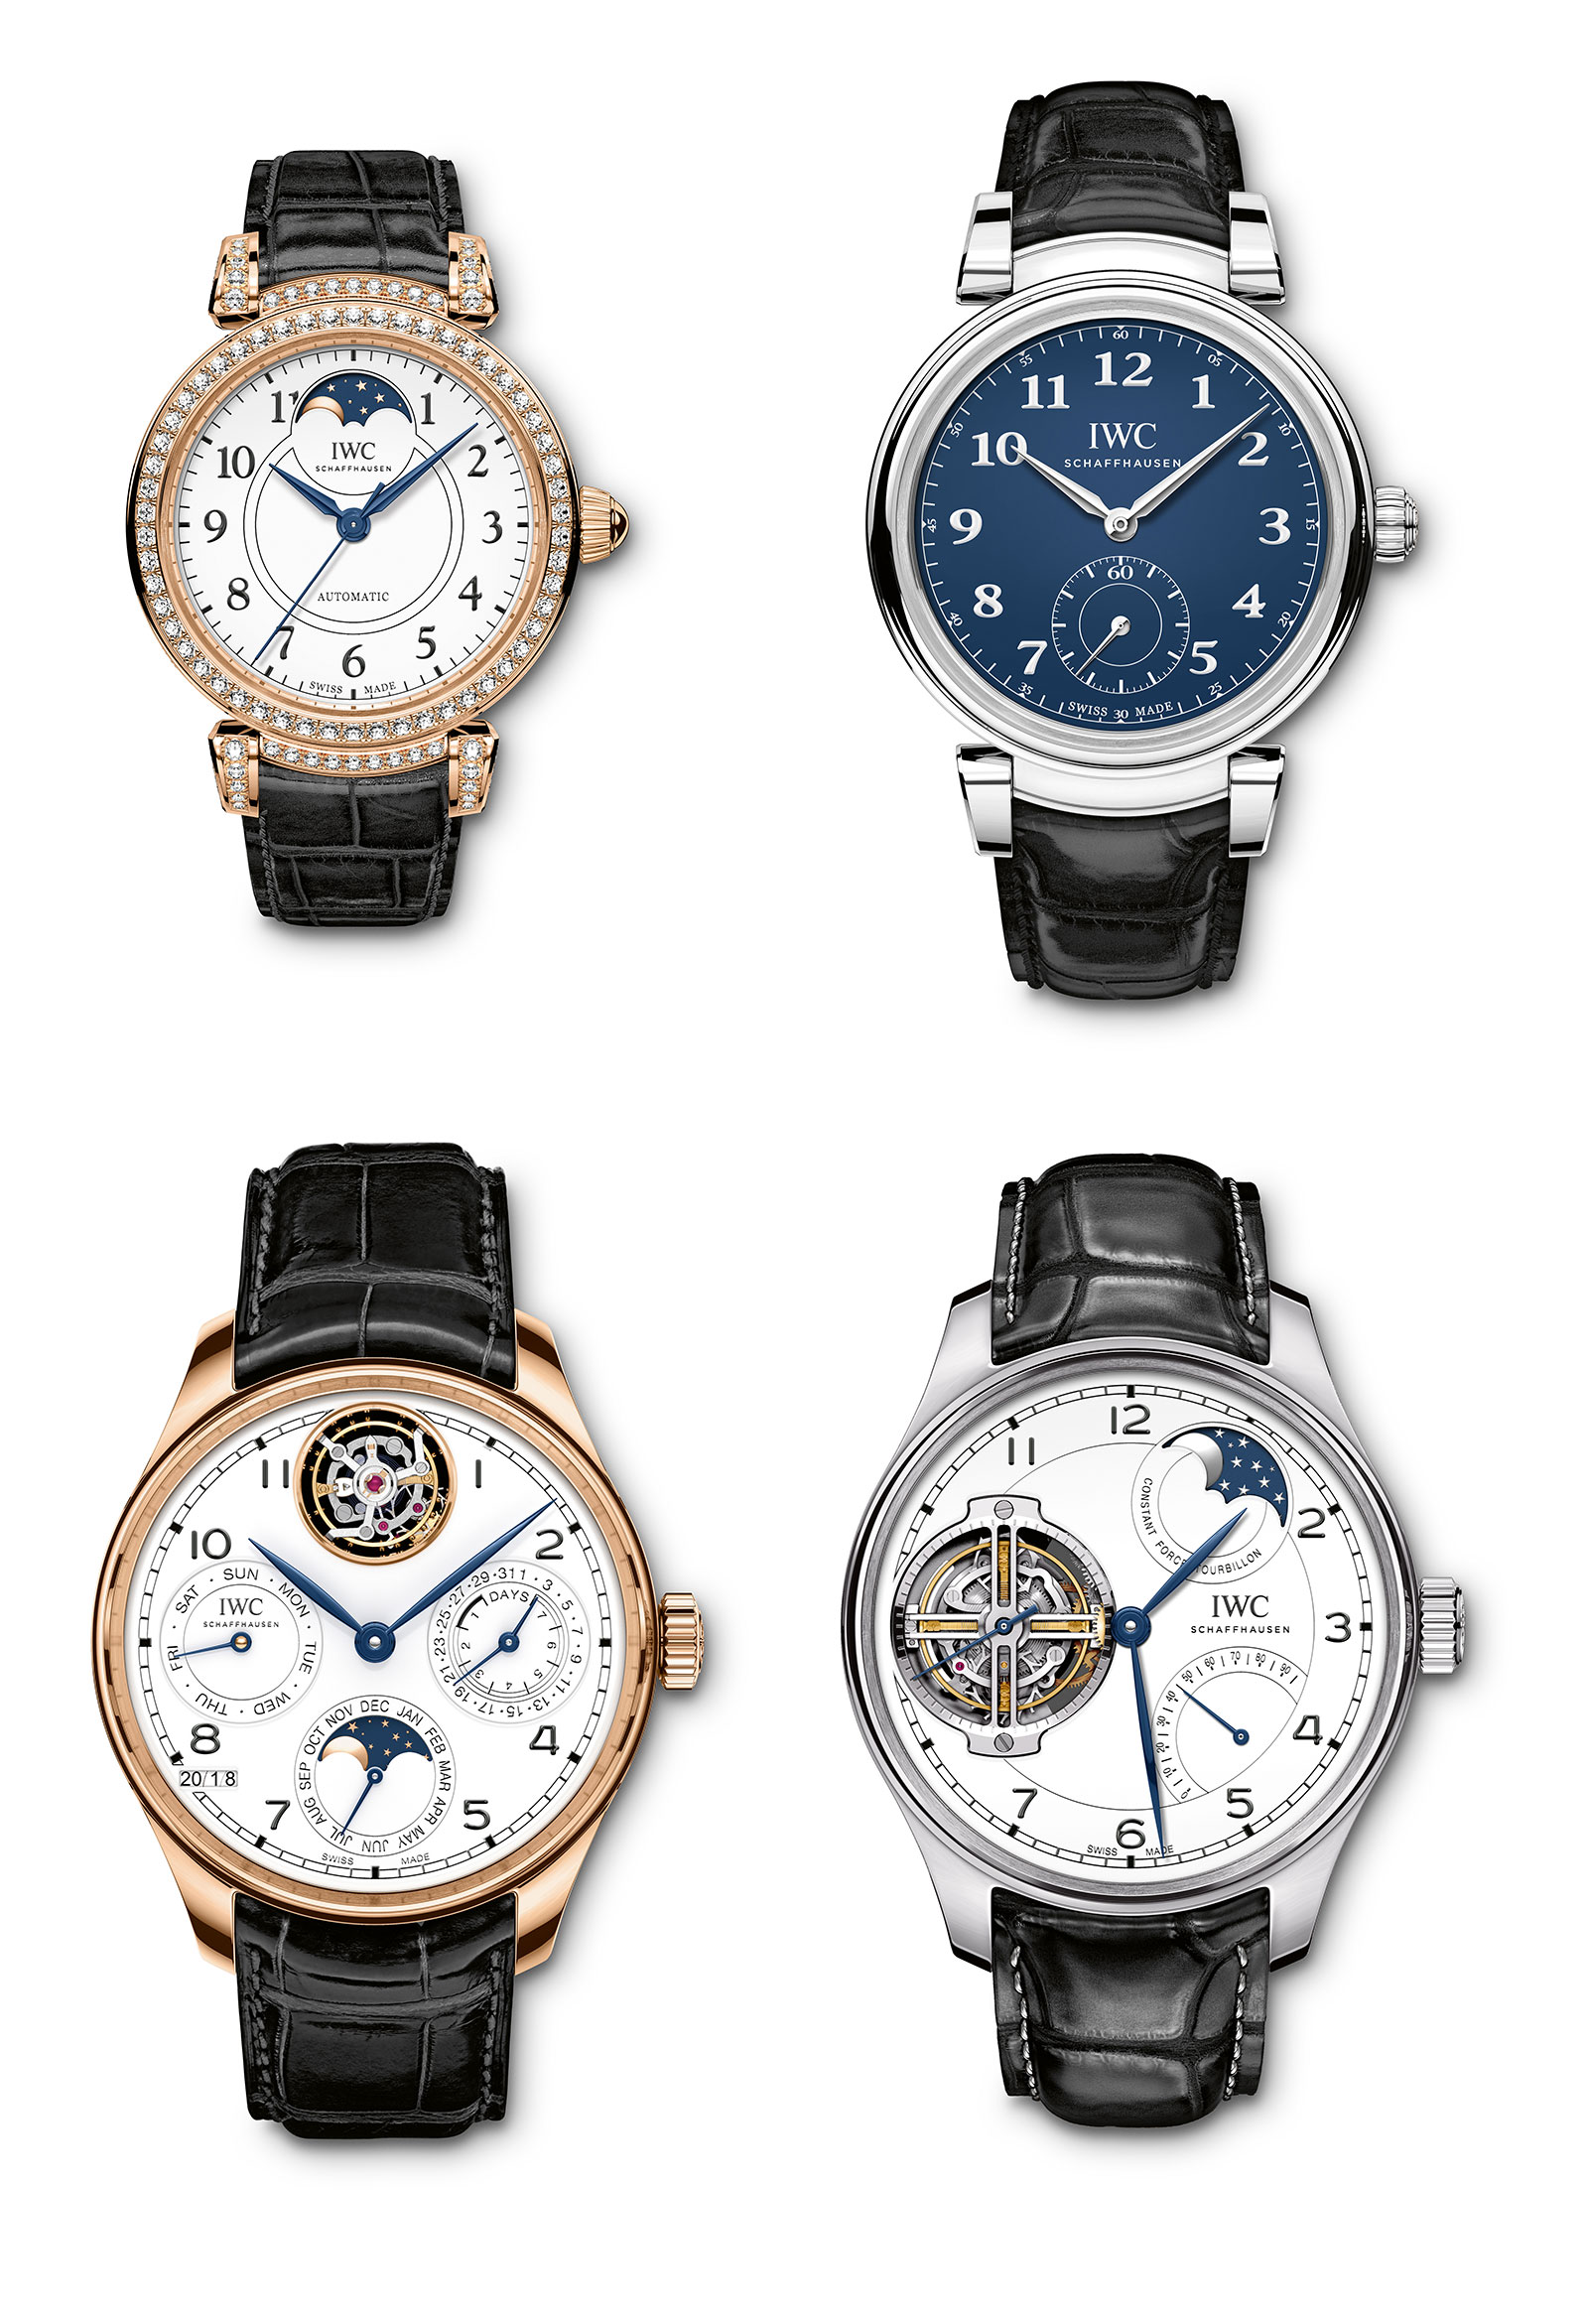 IWC 150th anniversary collection 2018